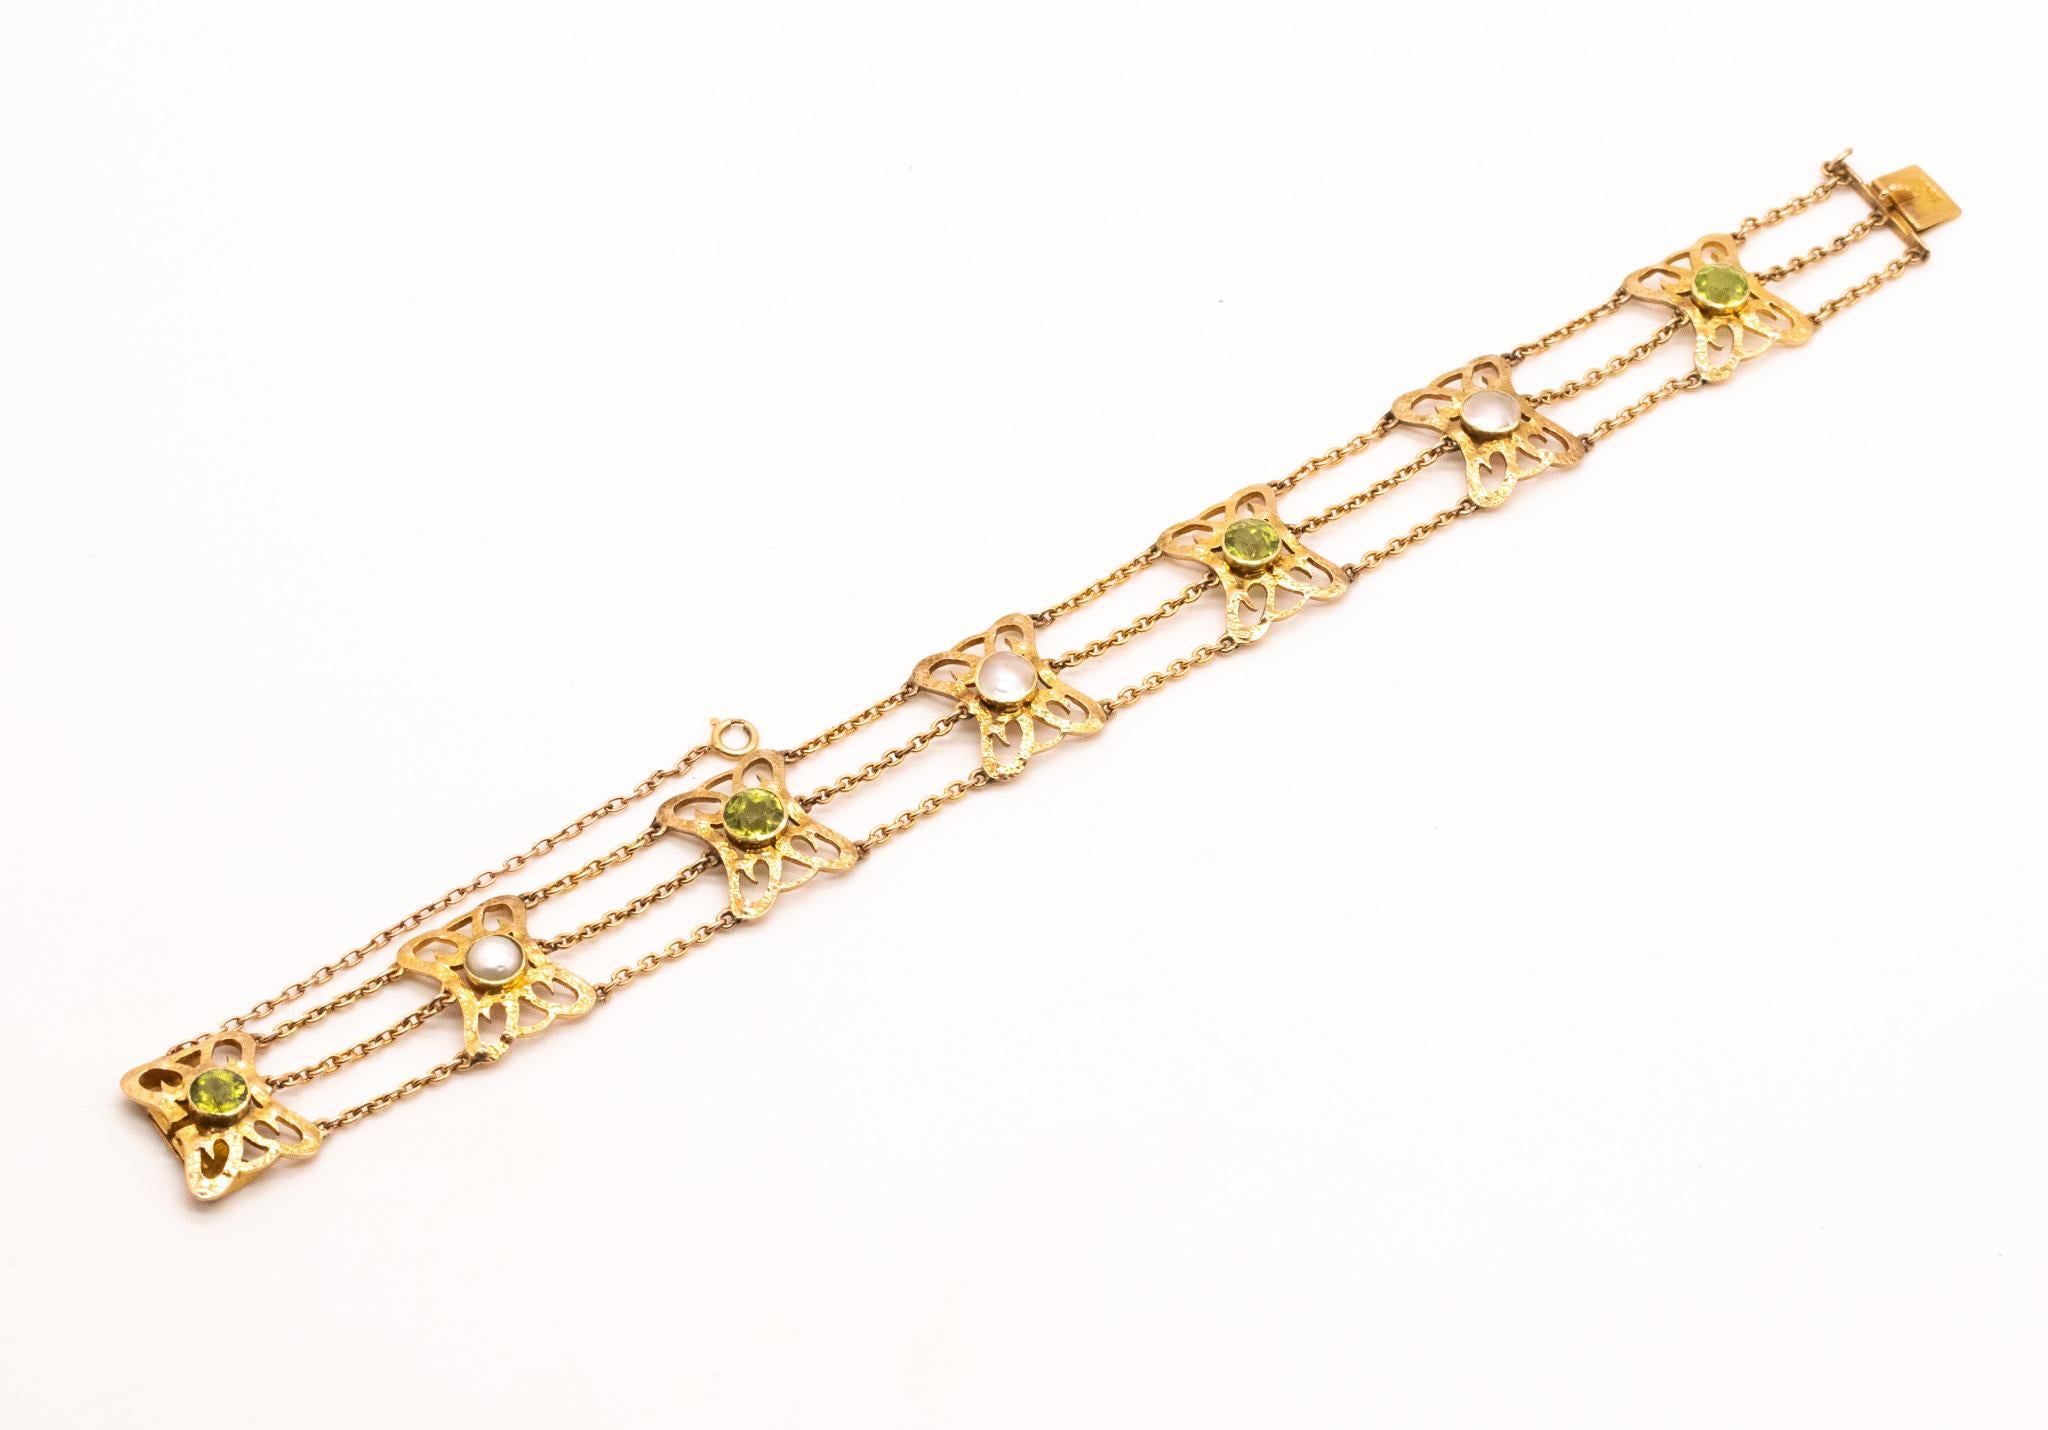 British 1900 Liberty Art and Craft Bracelet in 15 Cts with Pearls and Peridots In Excellent Condition For Sale In Miami, FL